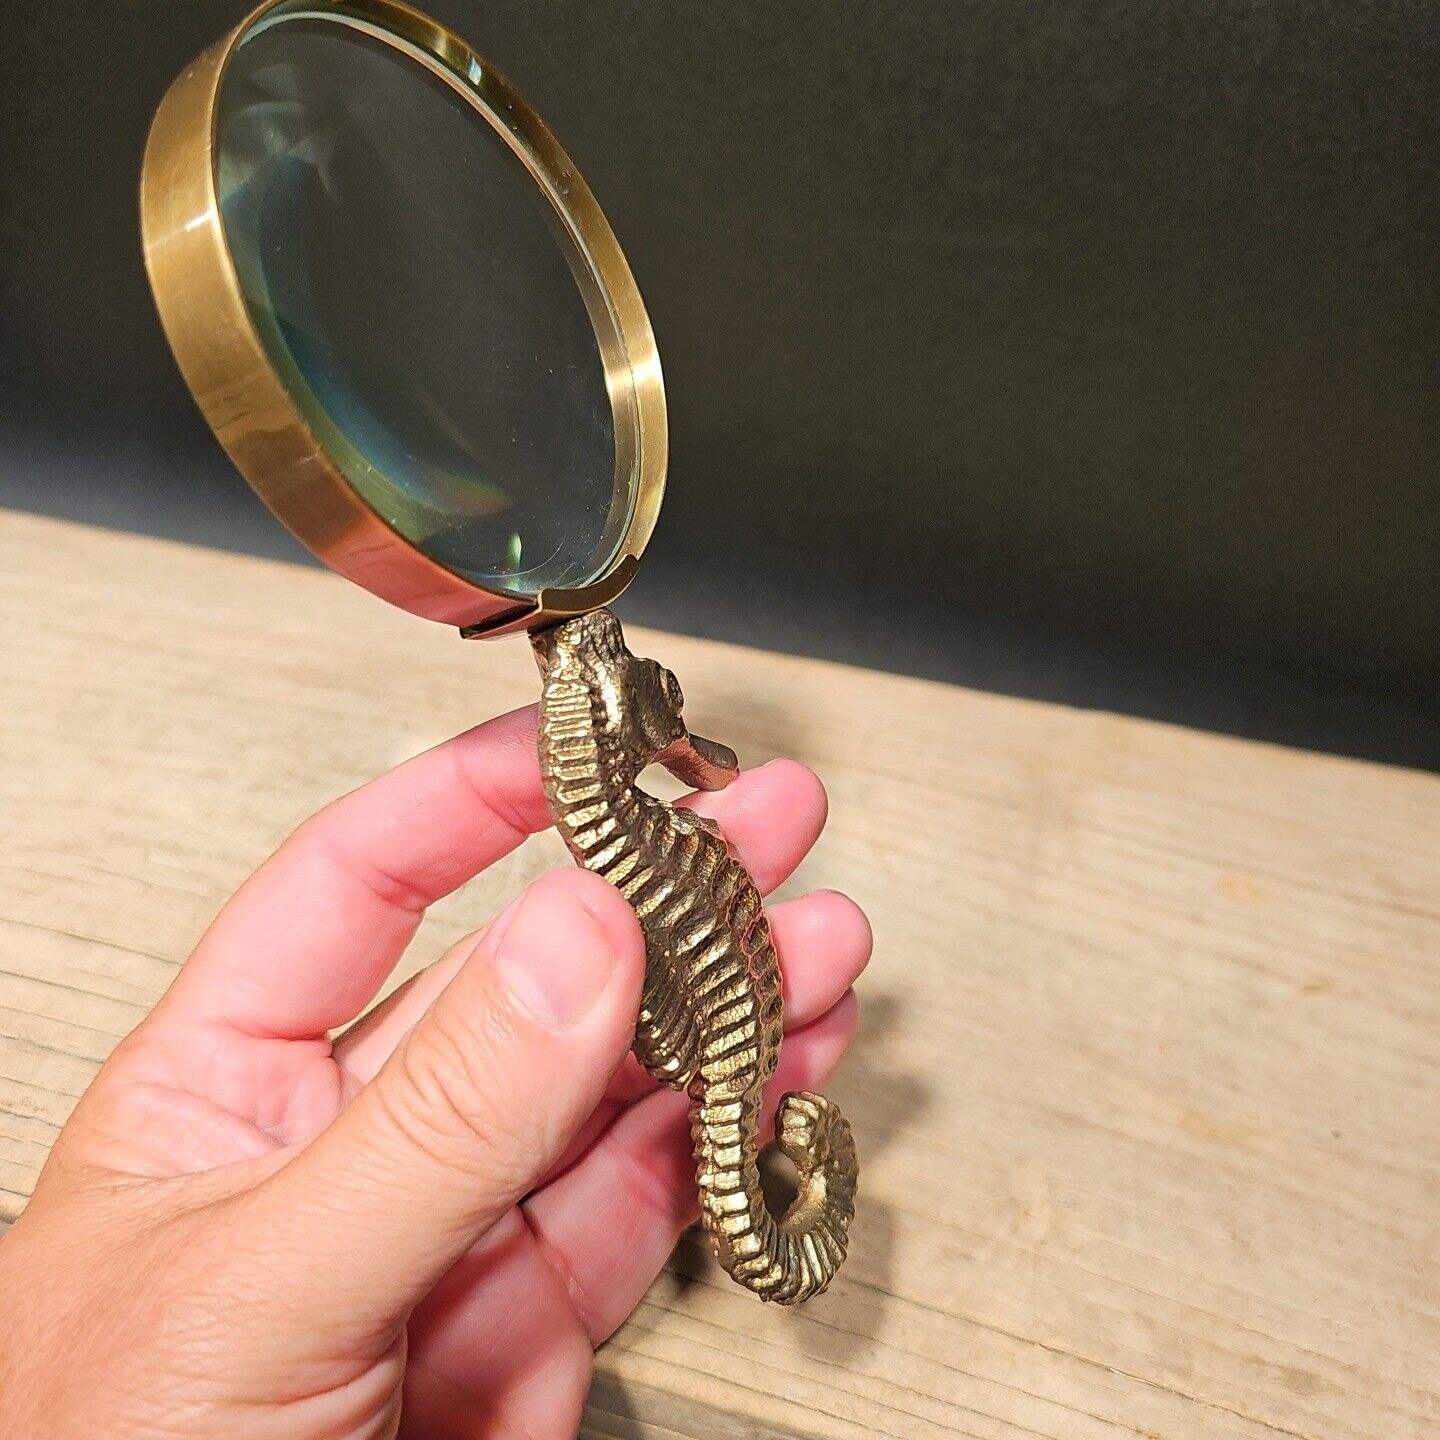 7" Vintage Antique Style Brass Seahorse Magnifying Glass Desk Hand Lens